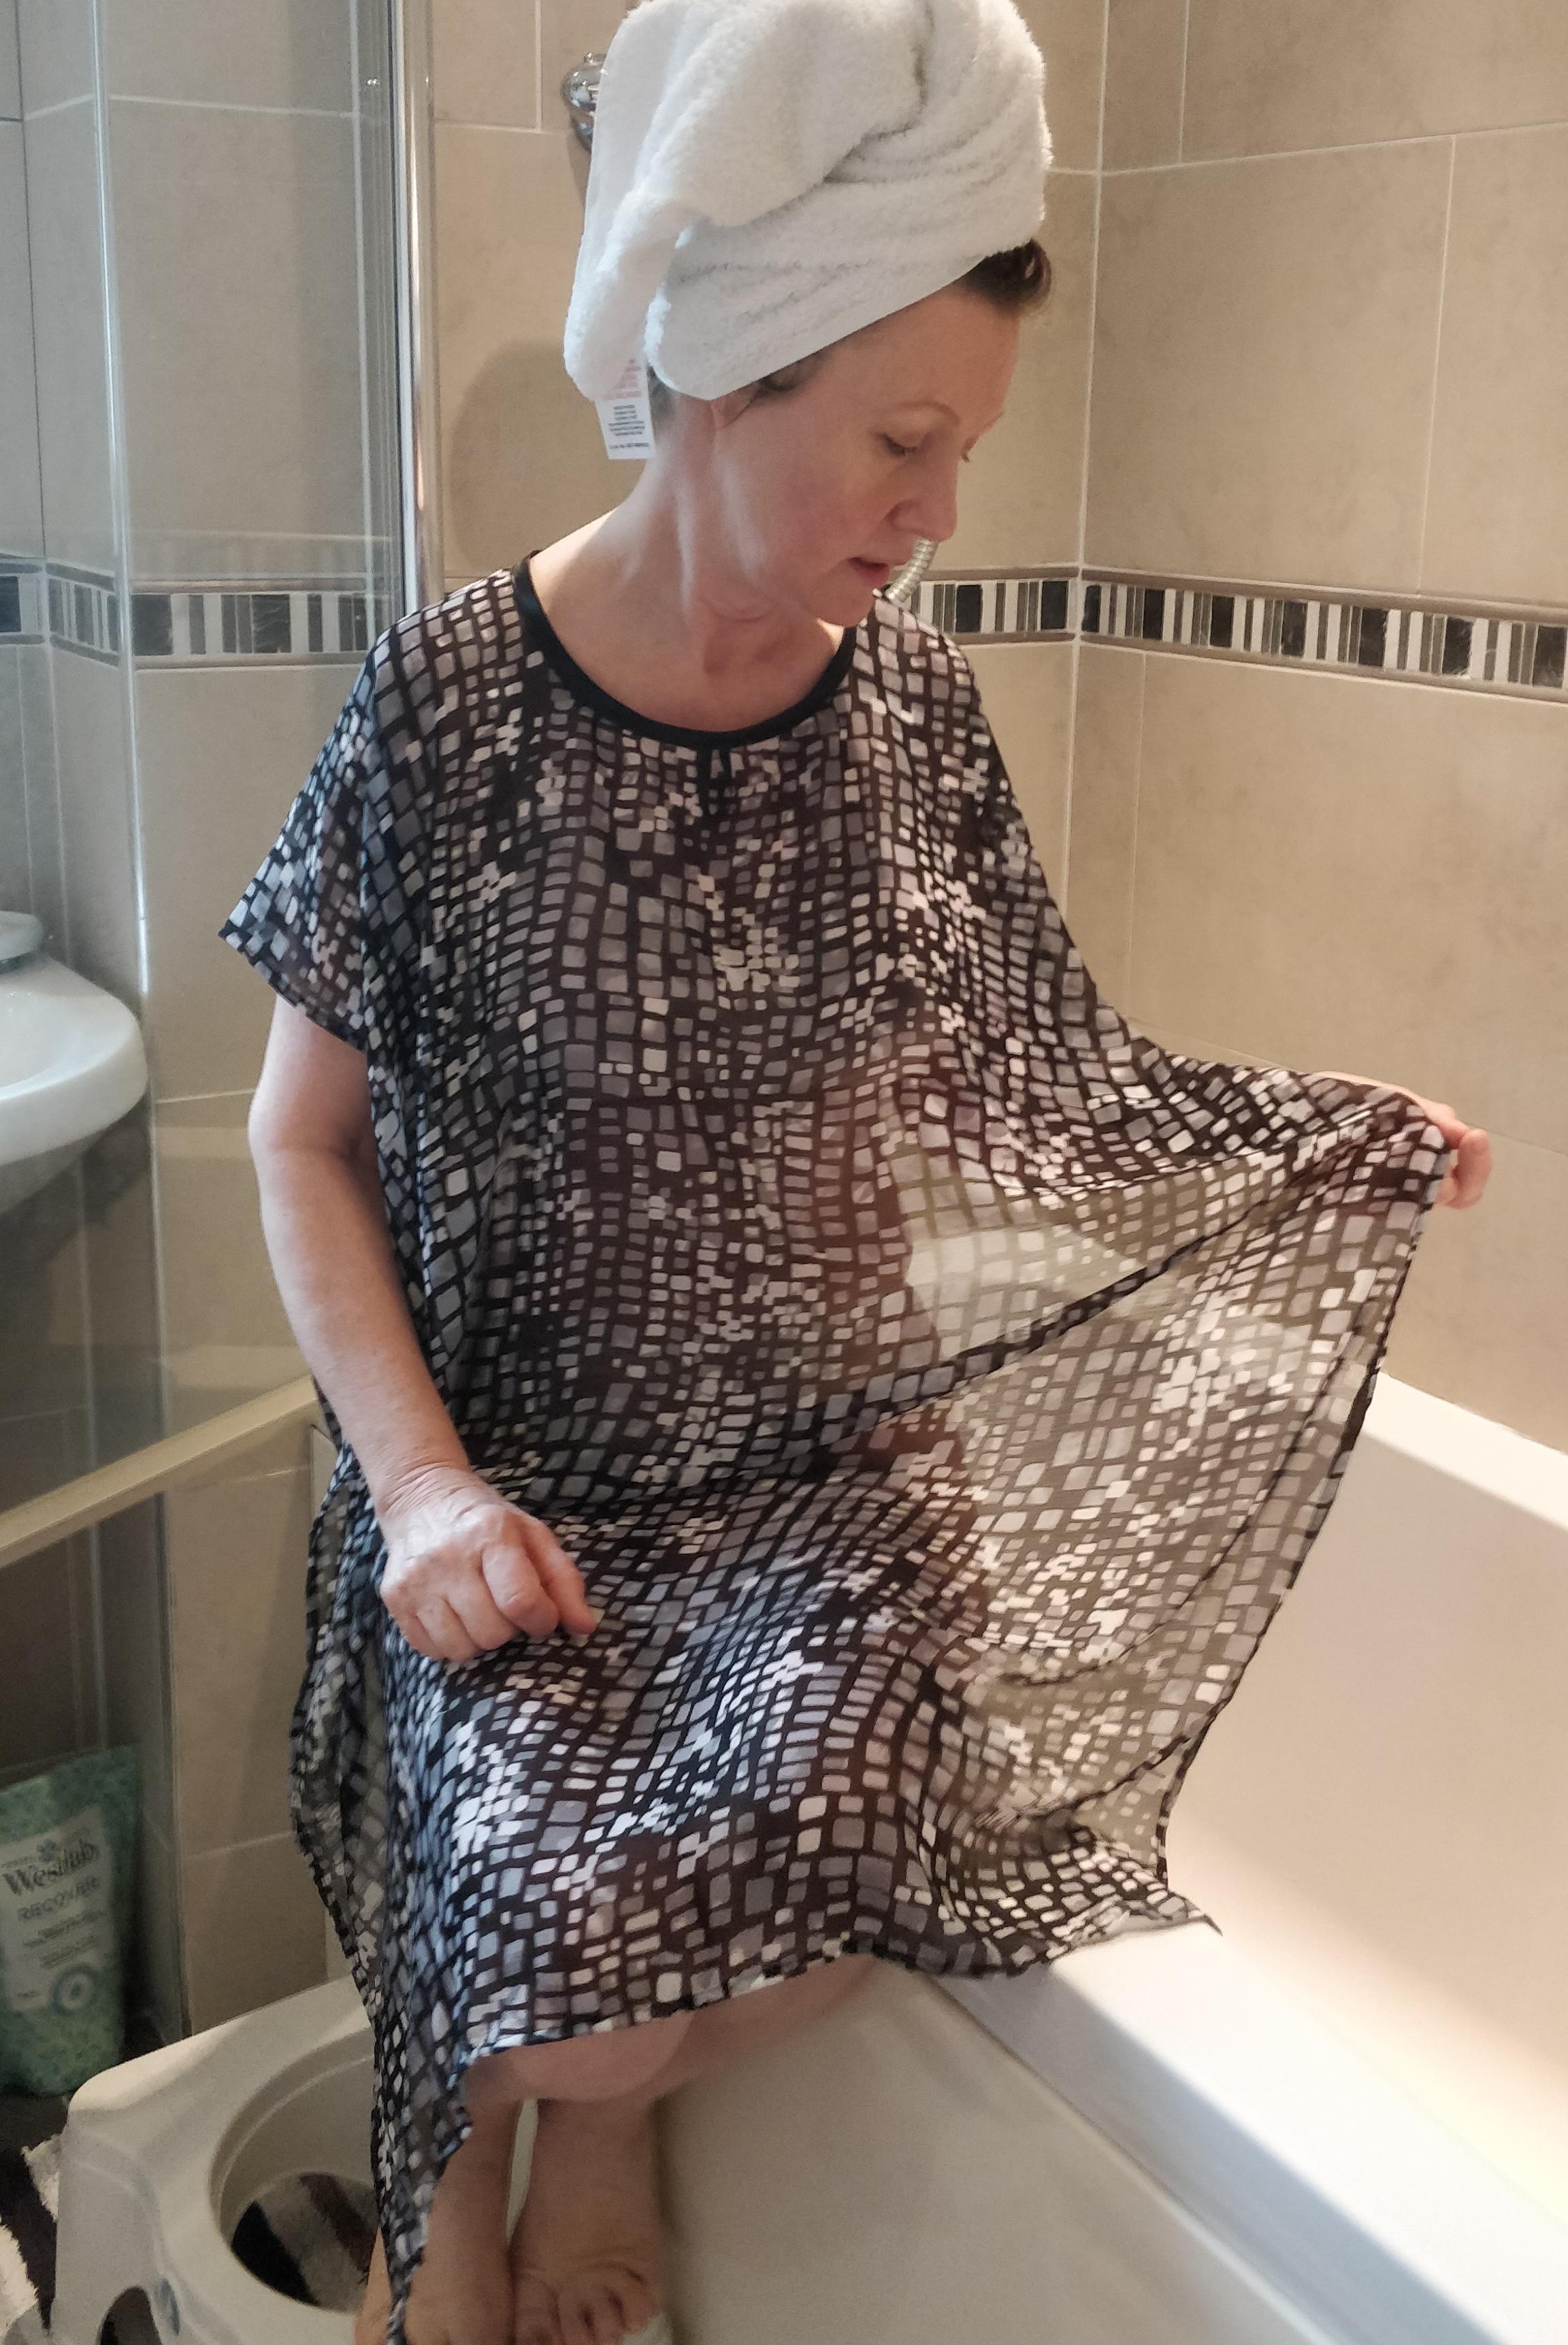 Black Abstract NeverNaked(tm) Shower Drapron® to provide modesty, dignity and privacy whilst being helped to shower or bathe. Shower modesty wear. Bathing modesty gown. Lightweight crepe chiffon. Slips over shoulders - No sleeves. Magnetic fastening at back